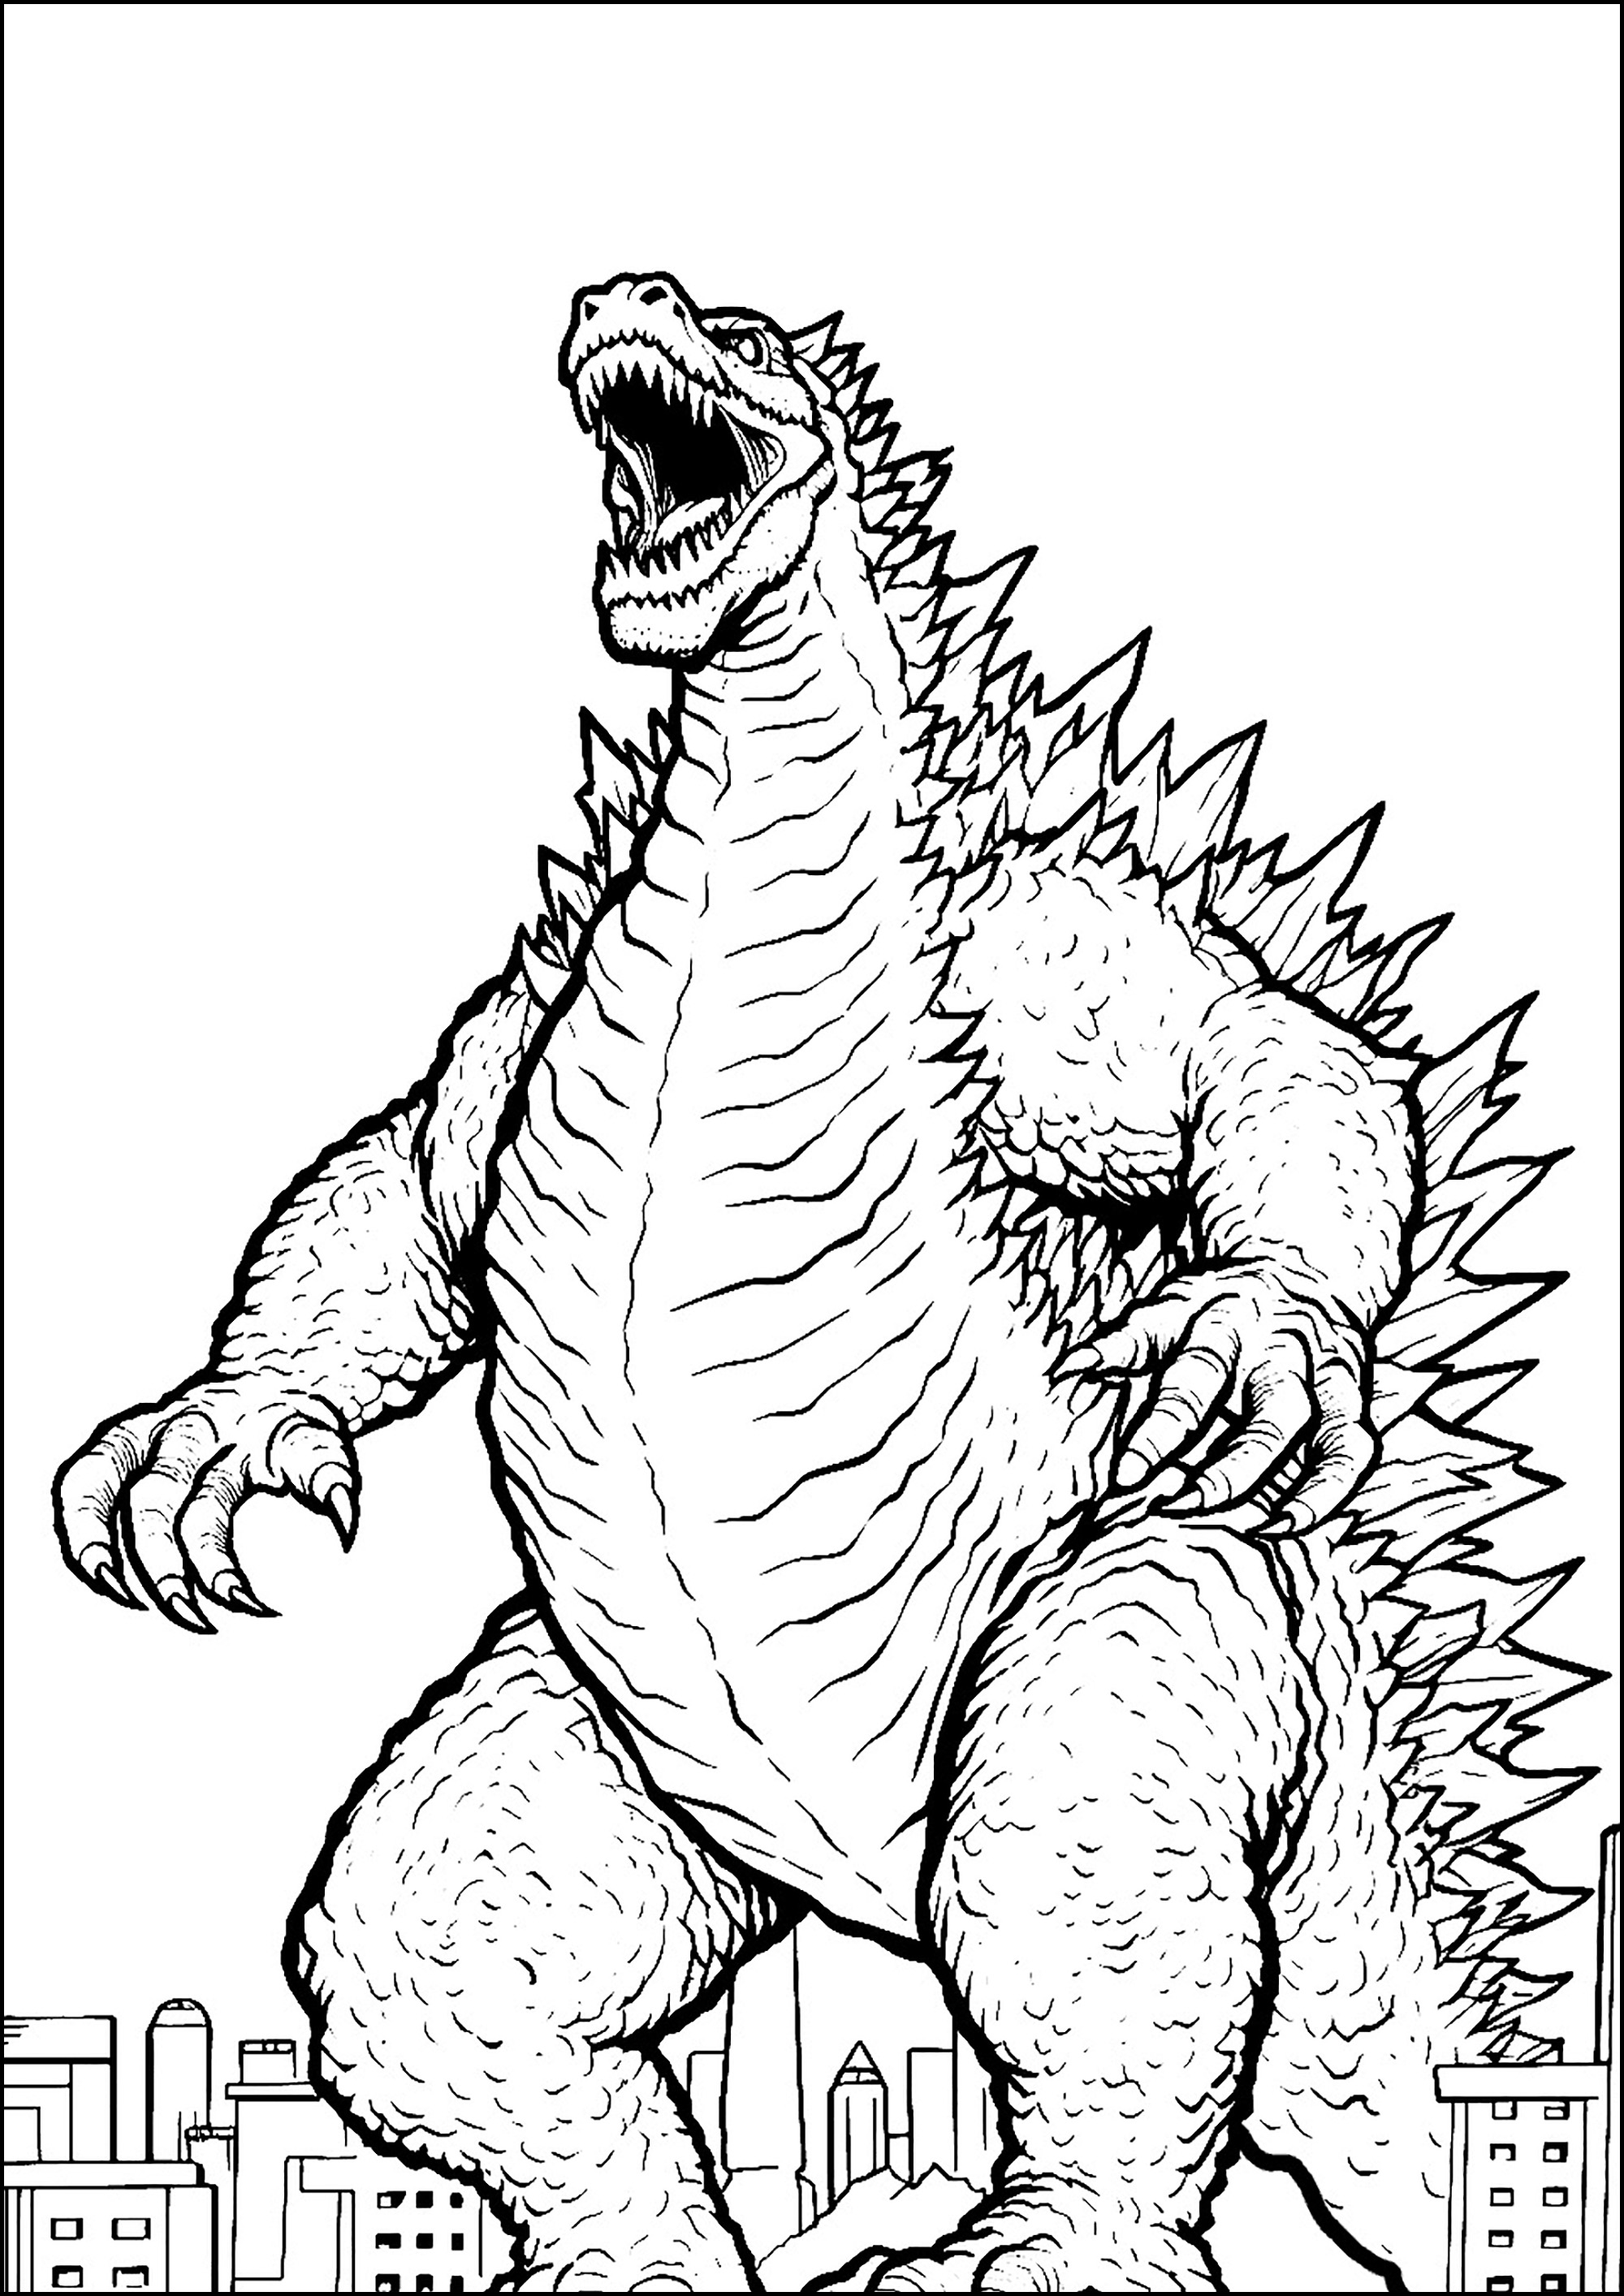 The huge, angry Godzilla. Godzilla is 'a cross between a gorilla and a whale' in reference to his size, strength and aquatic origins.